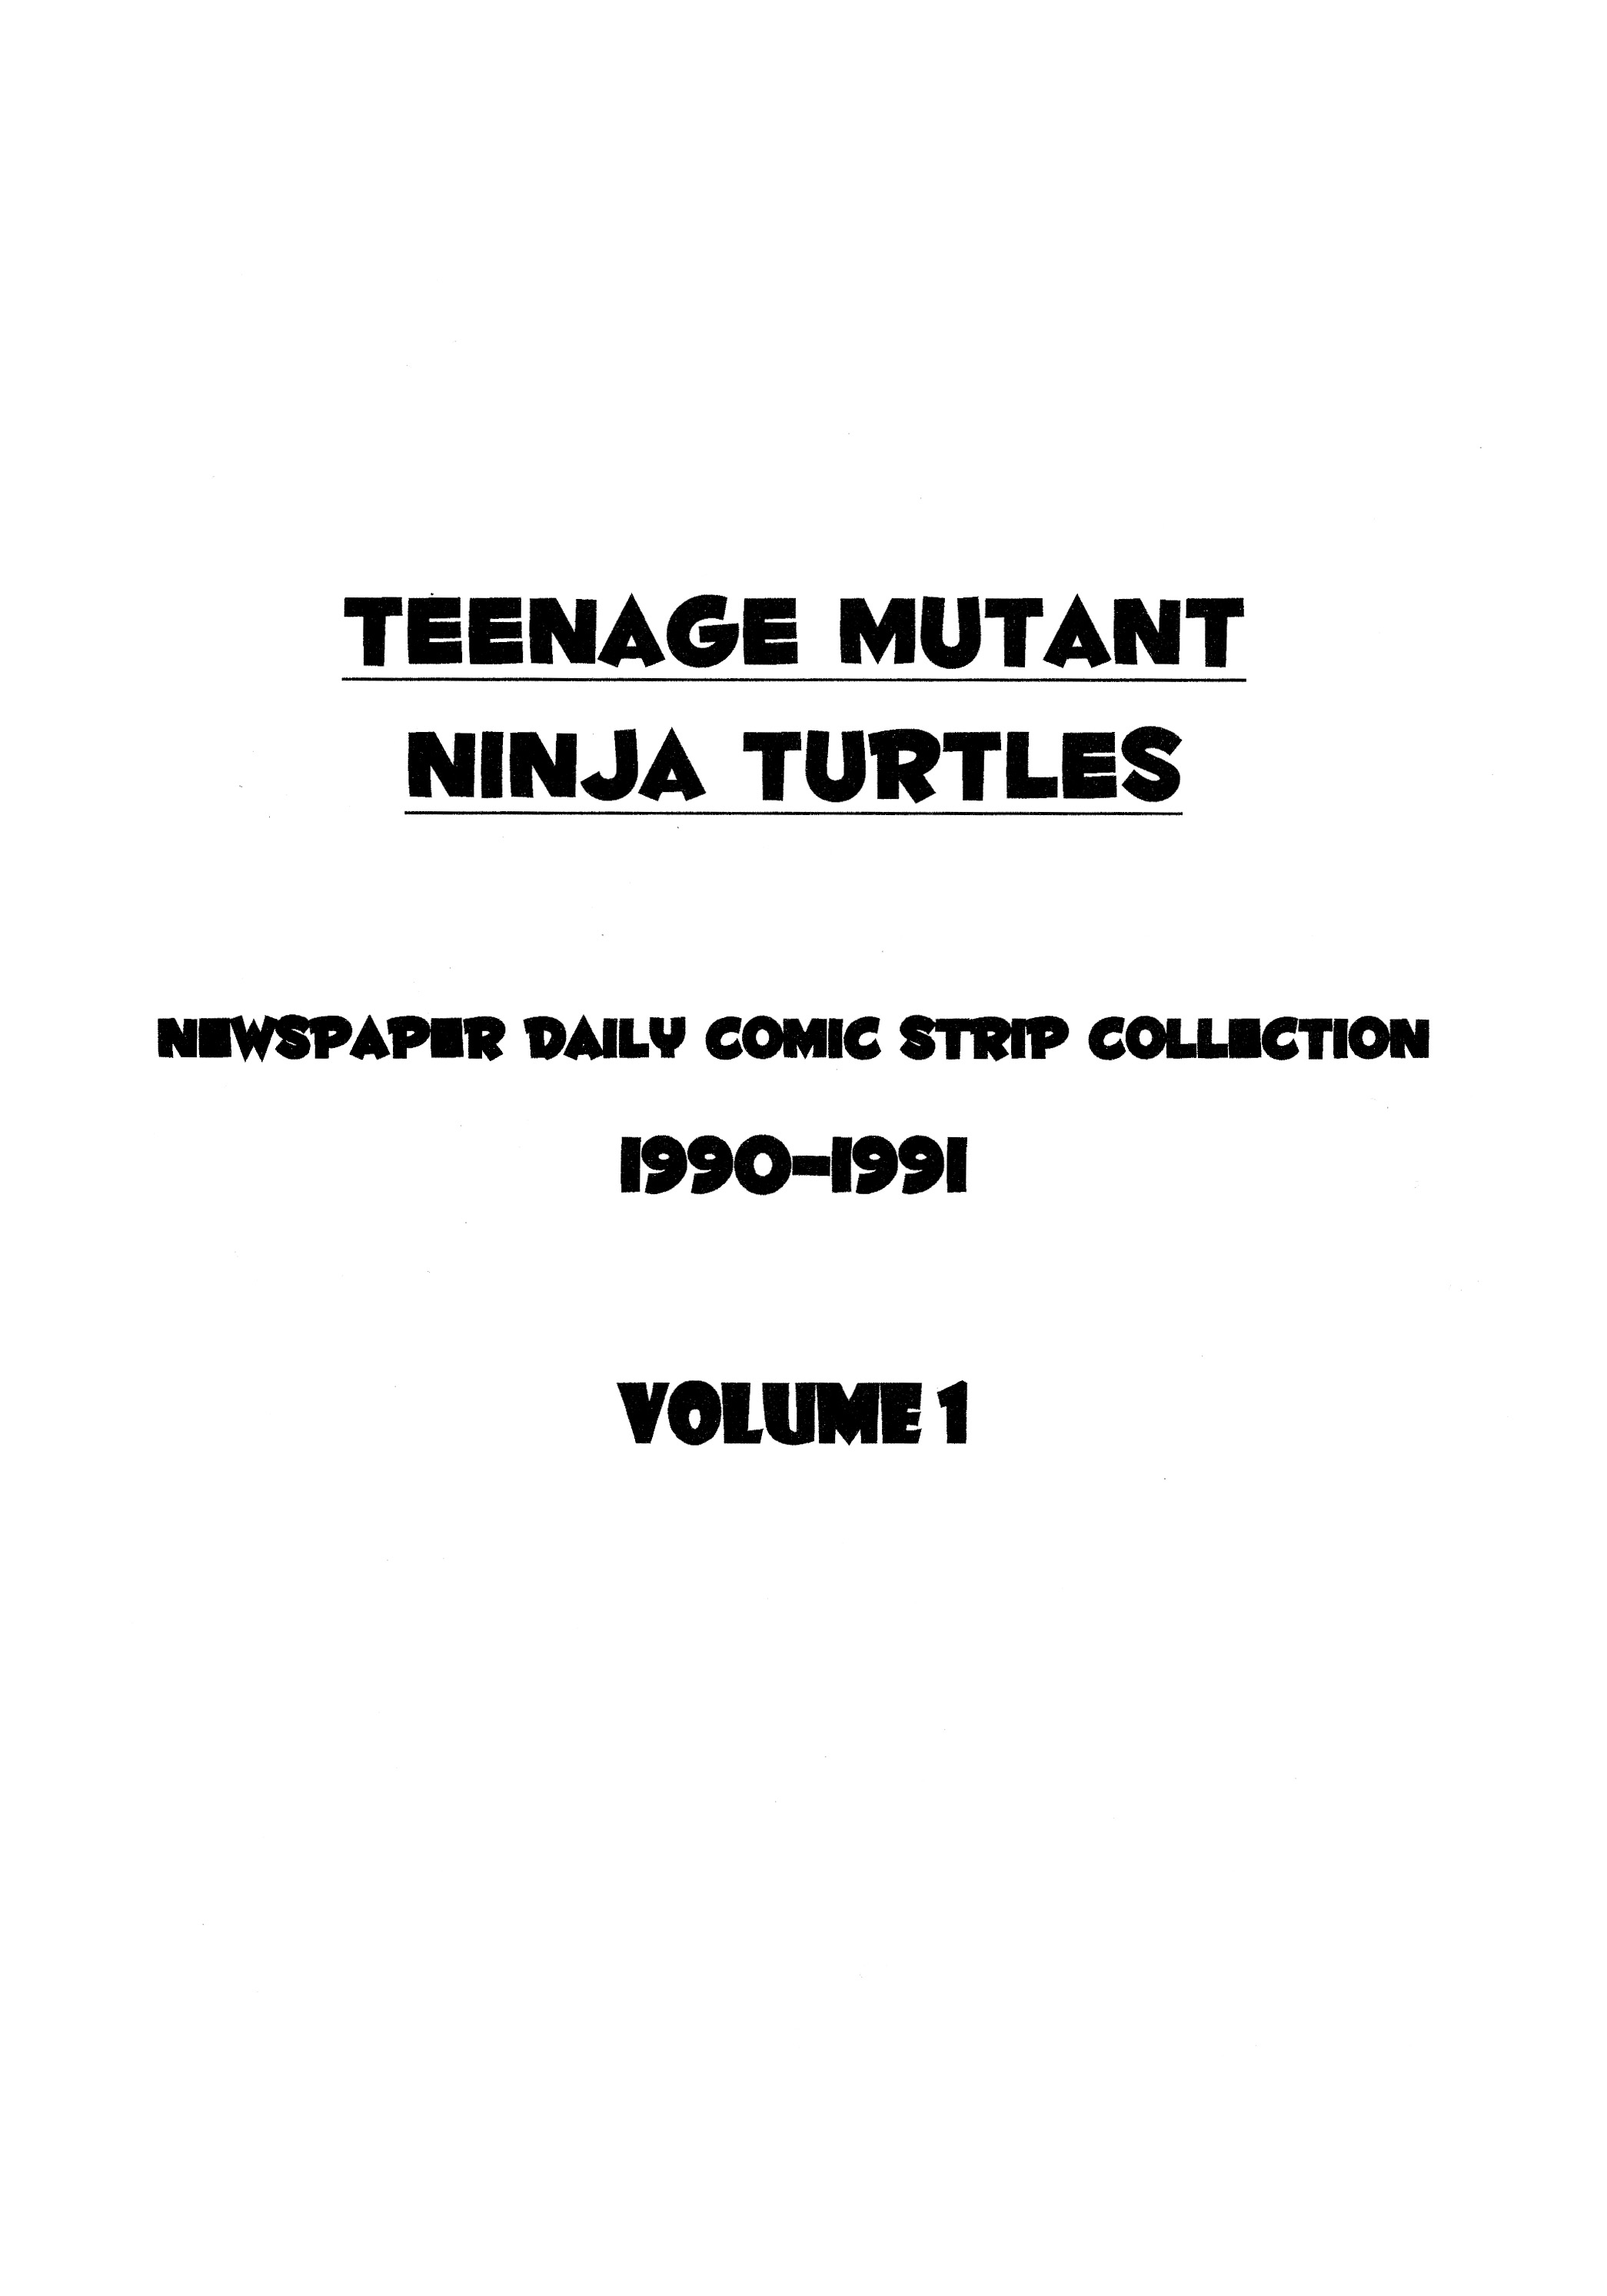 Read online Teenage Mutant Ninja Turtles: Complete Newspaper Daily Comic Strip Collection comic -  Issue # TPB 1 - 2